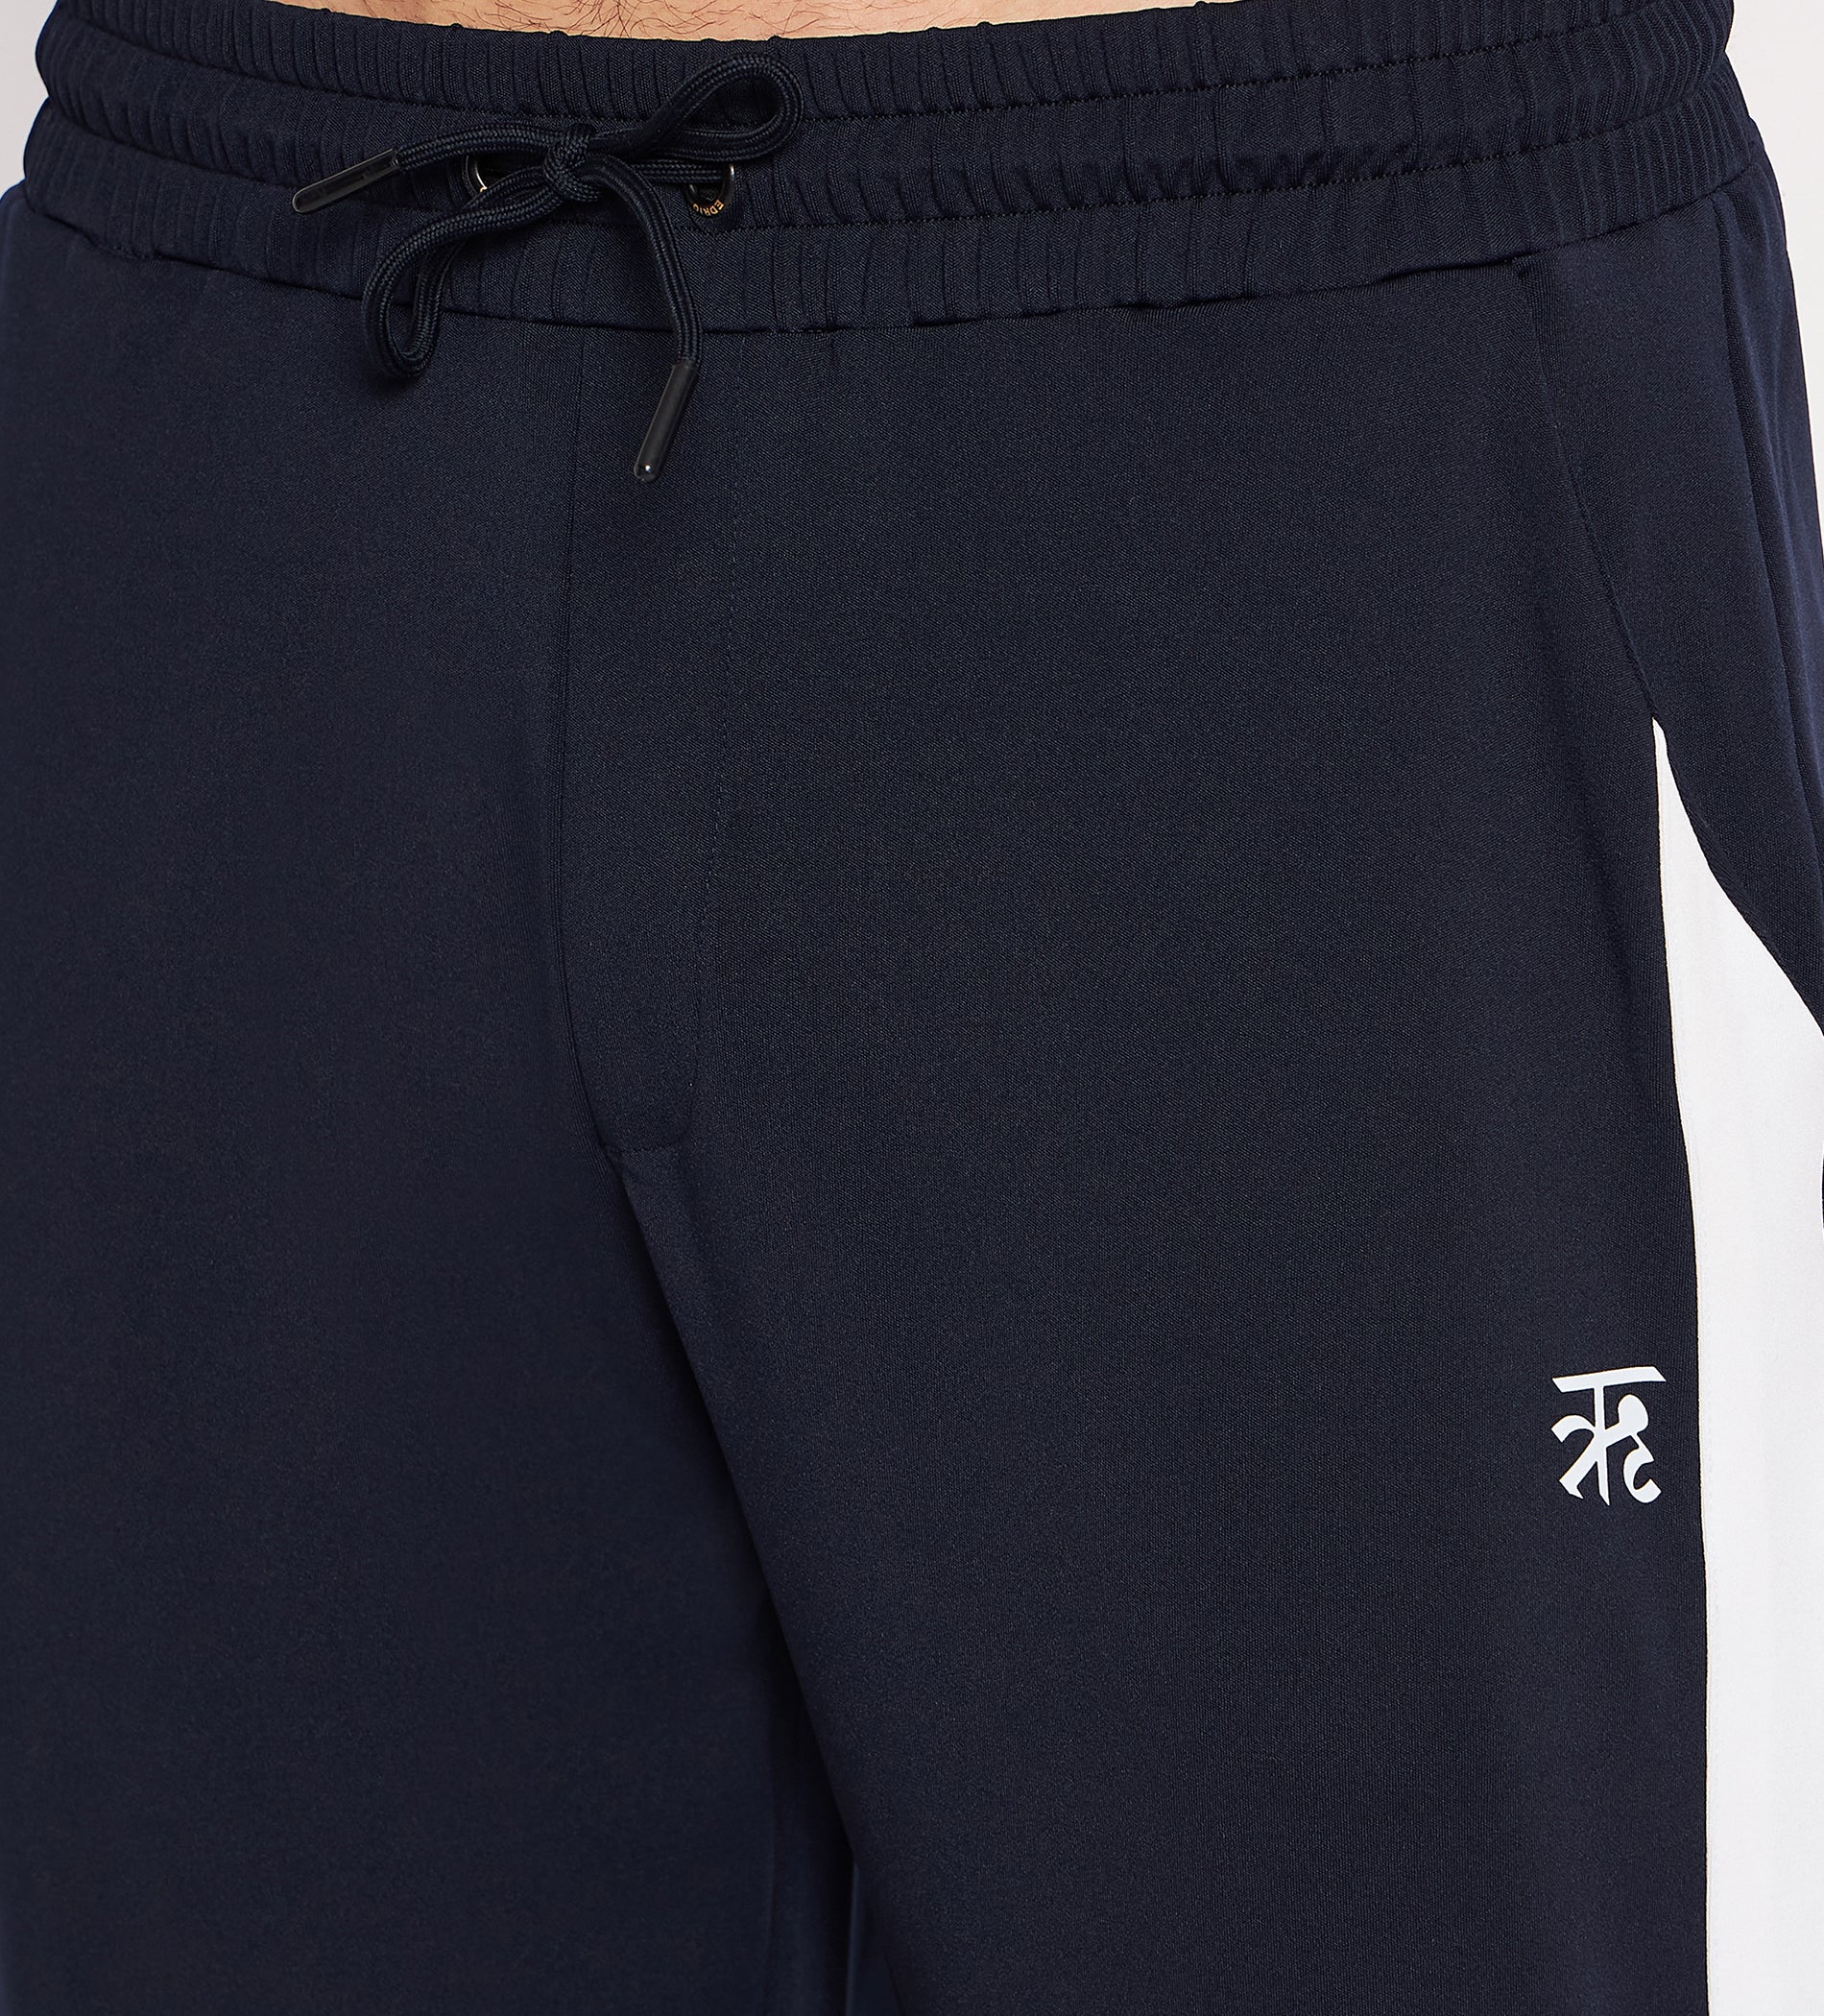 Navy Straight Fit Track Pants with White Side Panels